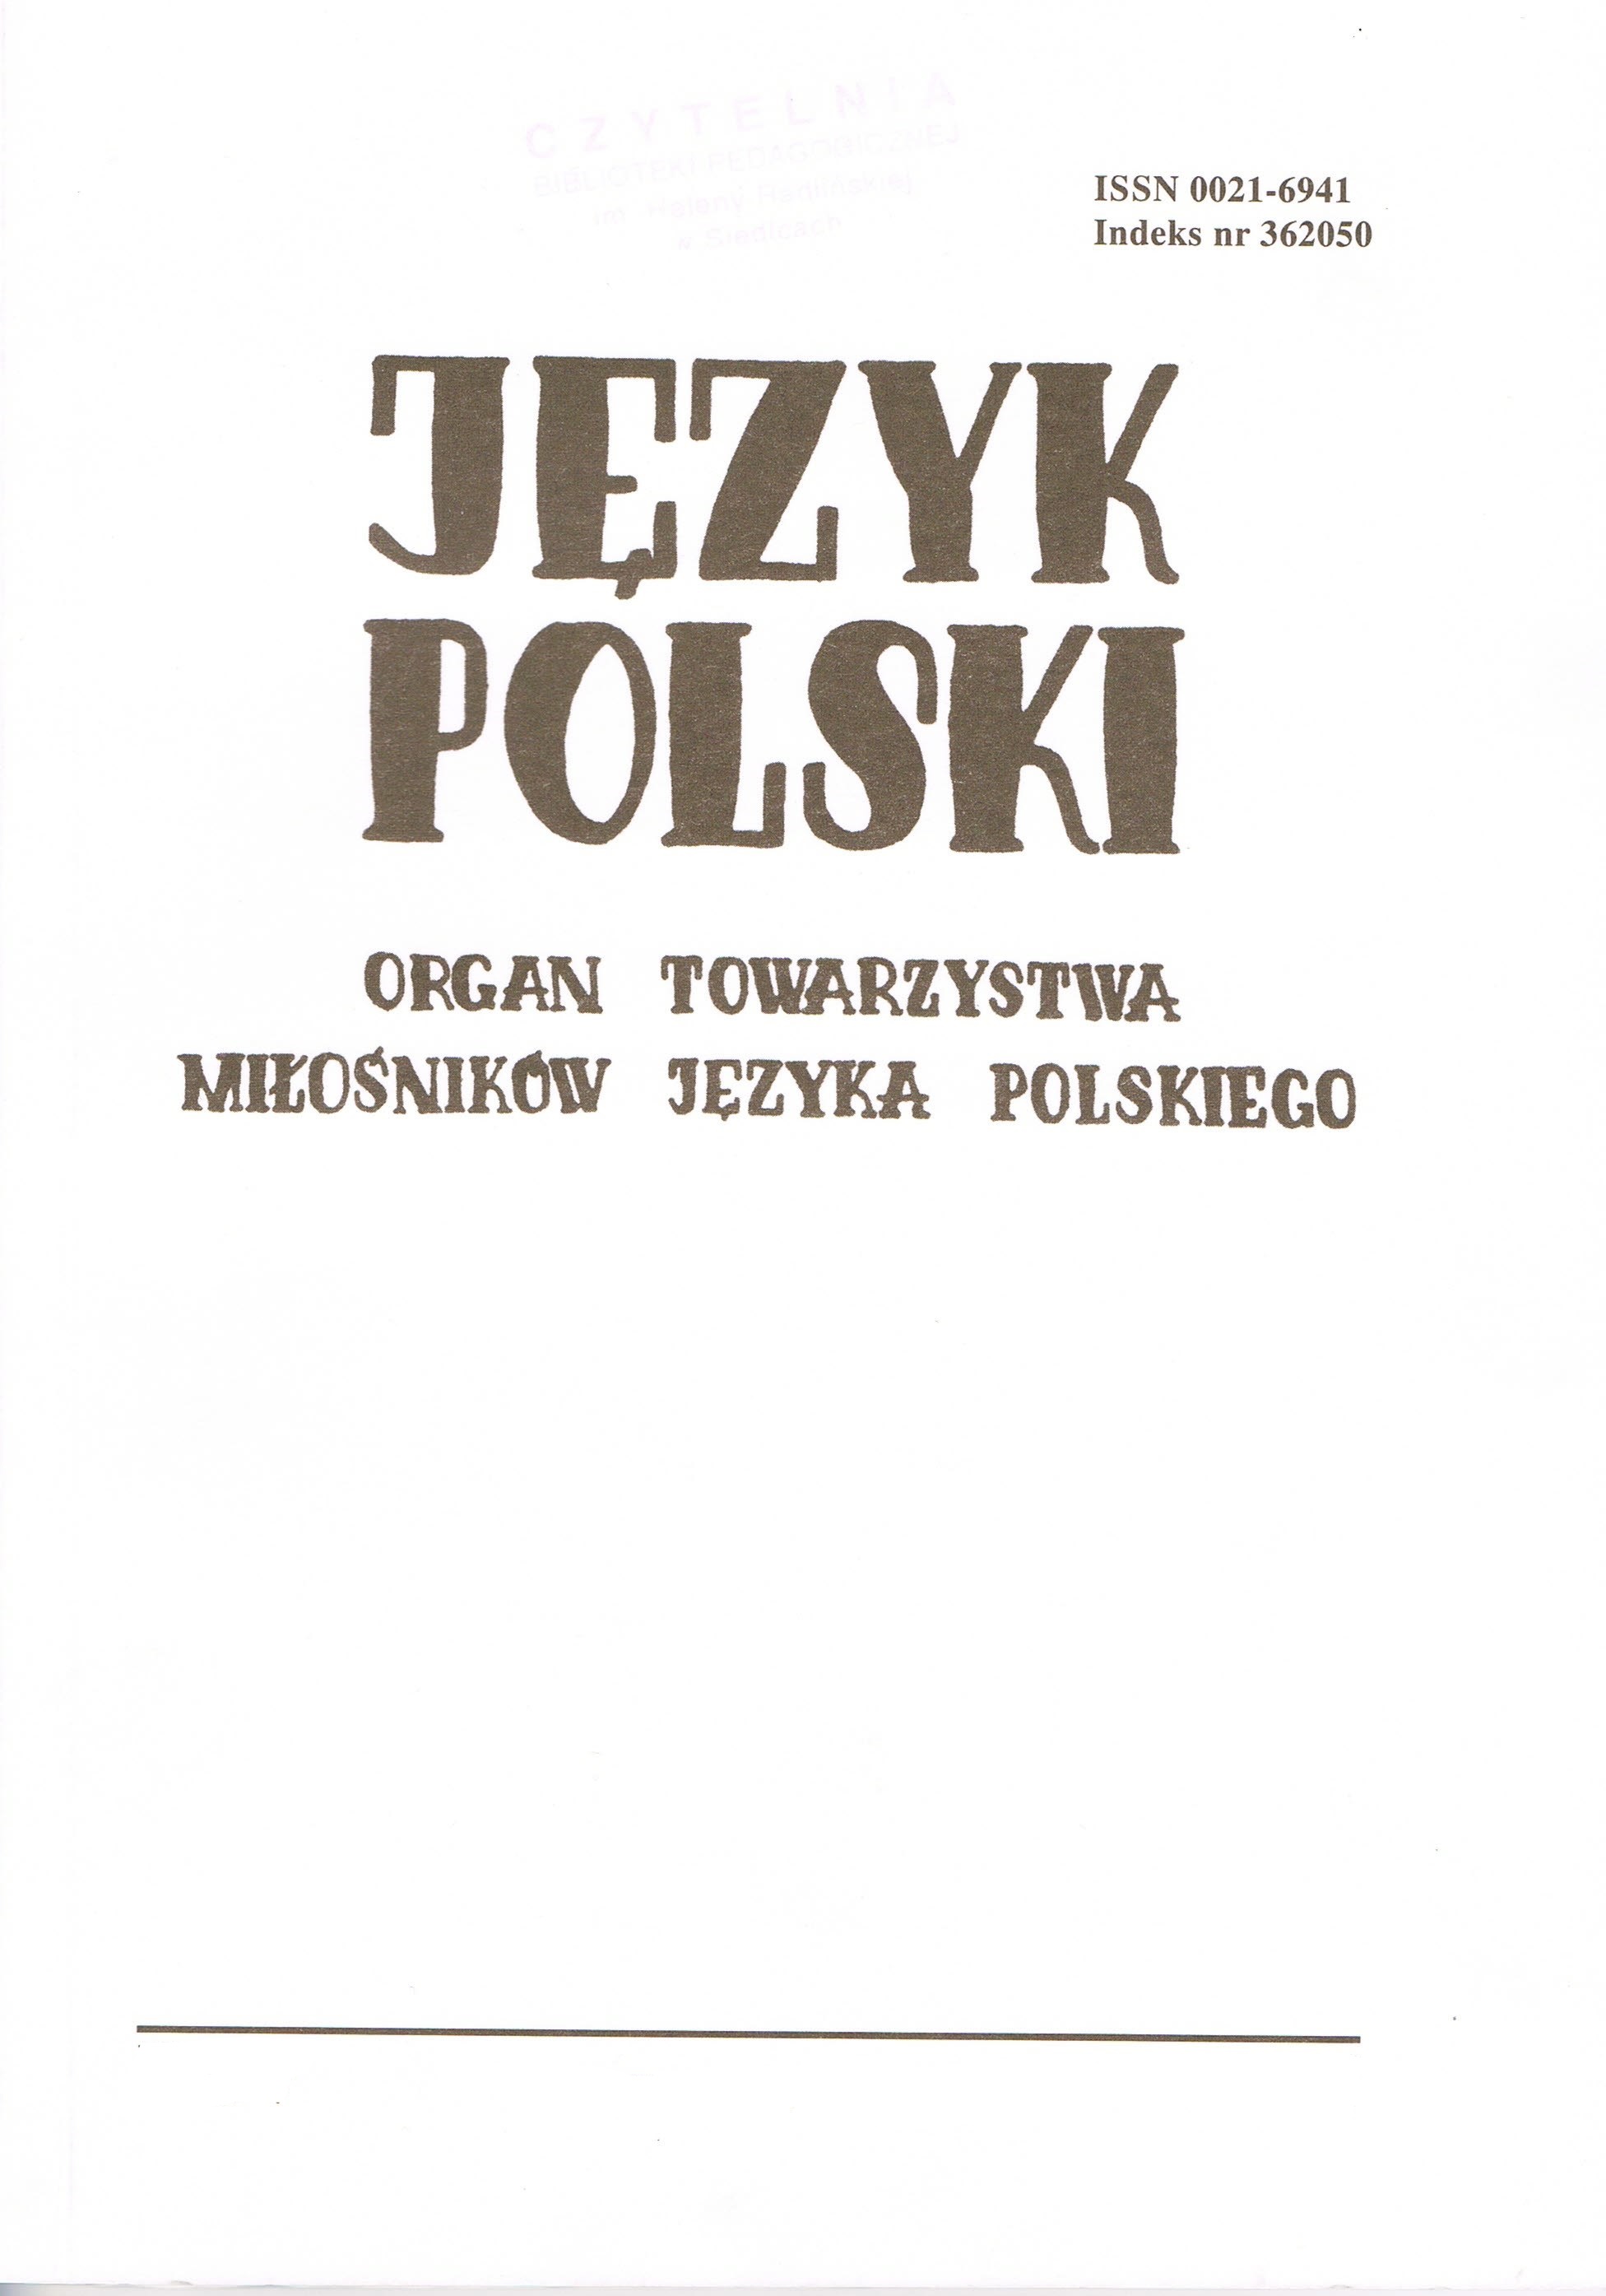 Adjectival and adverbial predicatives (można, niepodobna, wiadomo, wolno) in the Dictionary of Polish language of the 17th and the 1st half of the 18t Cover Image